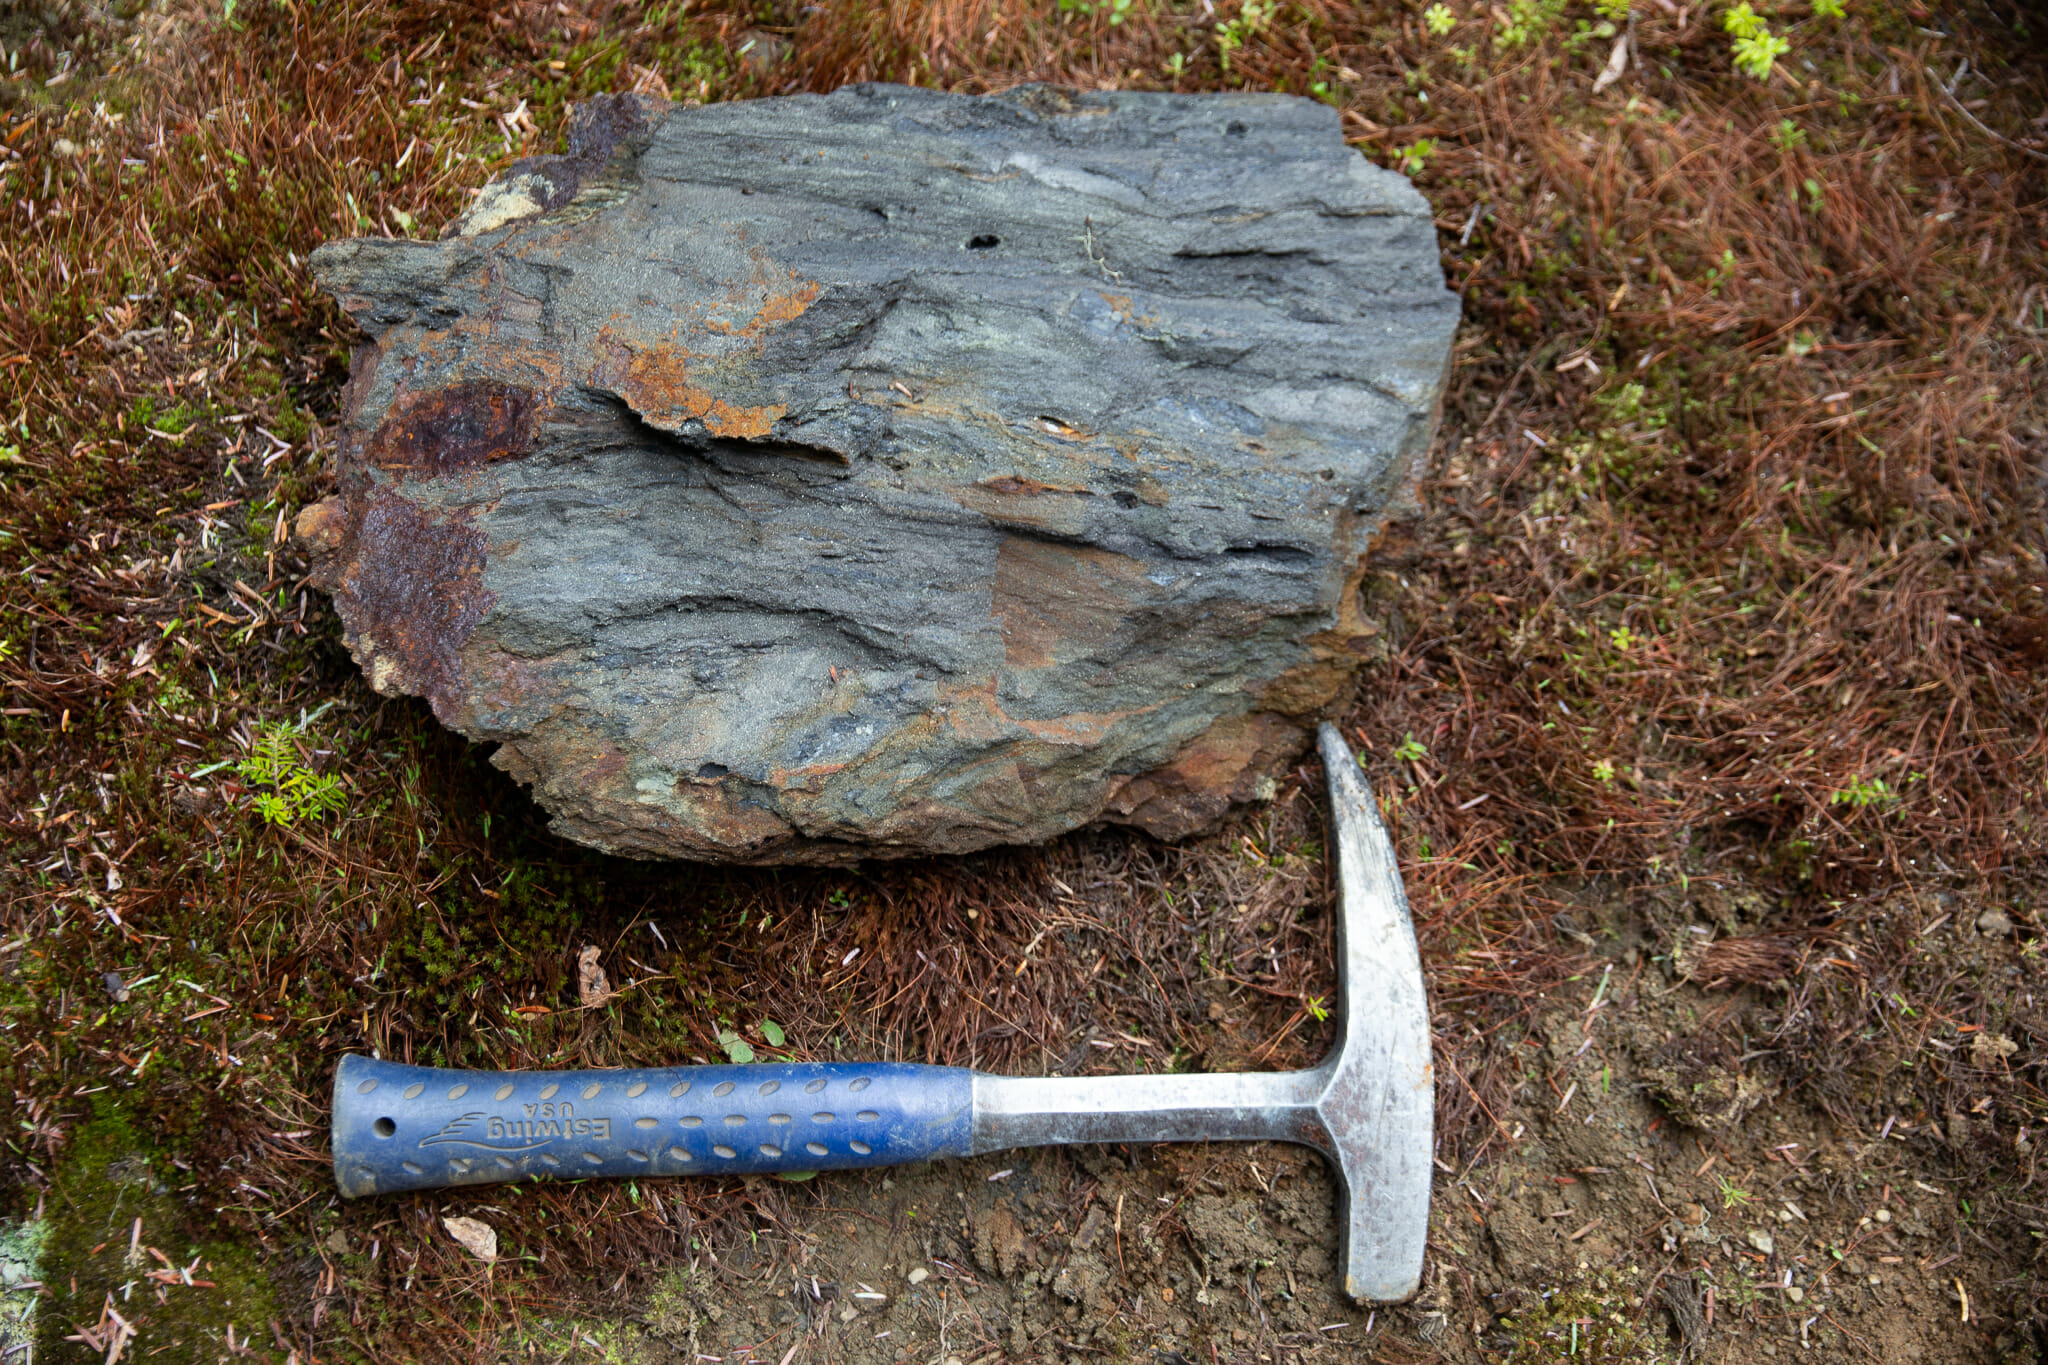 Massive Sulphide from the Black Dog Showing. All the sulphide minerals make this rock on stinky specimen